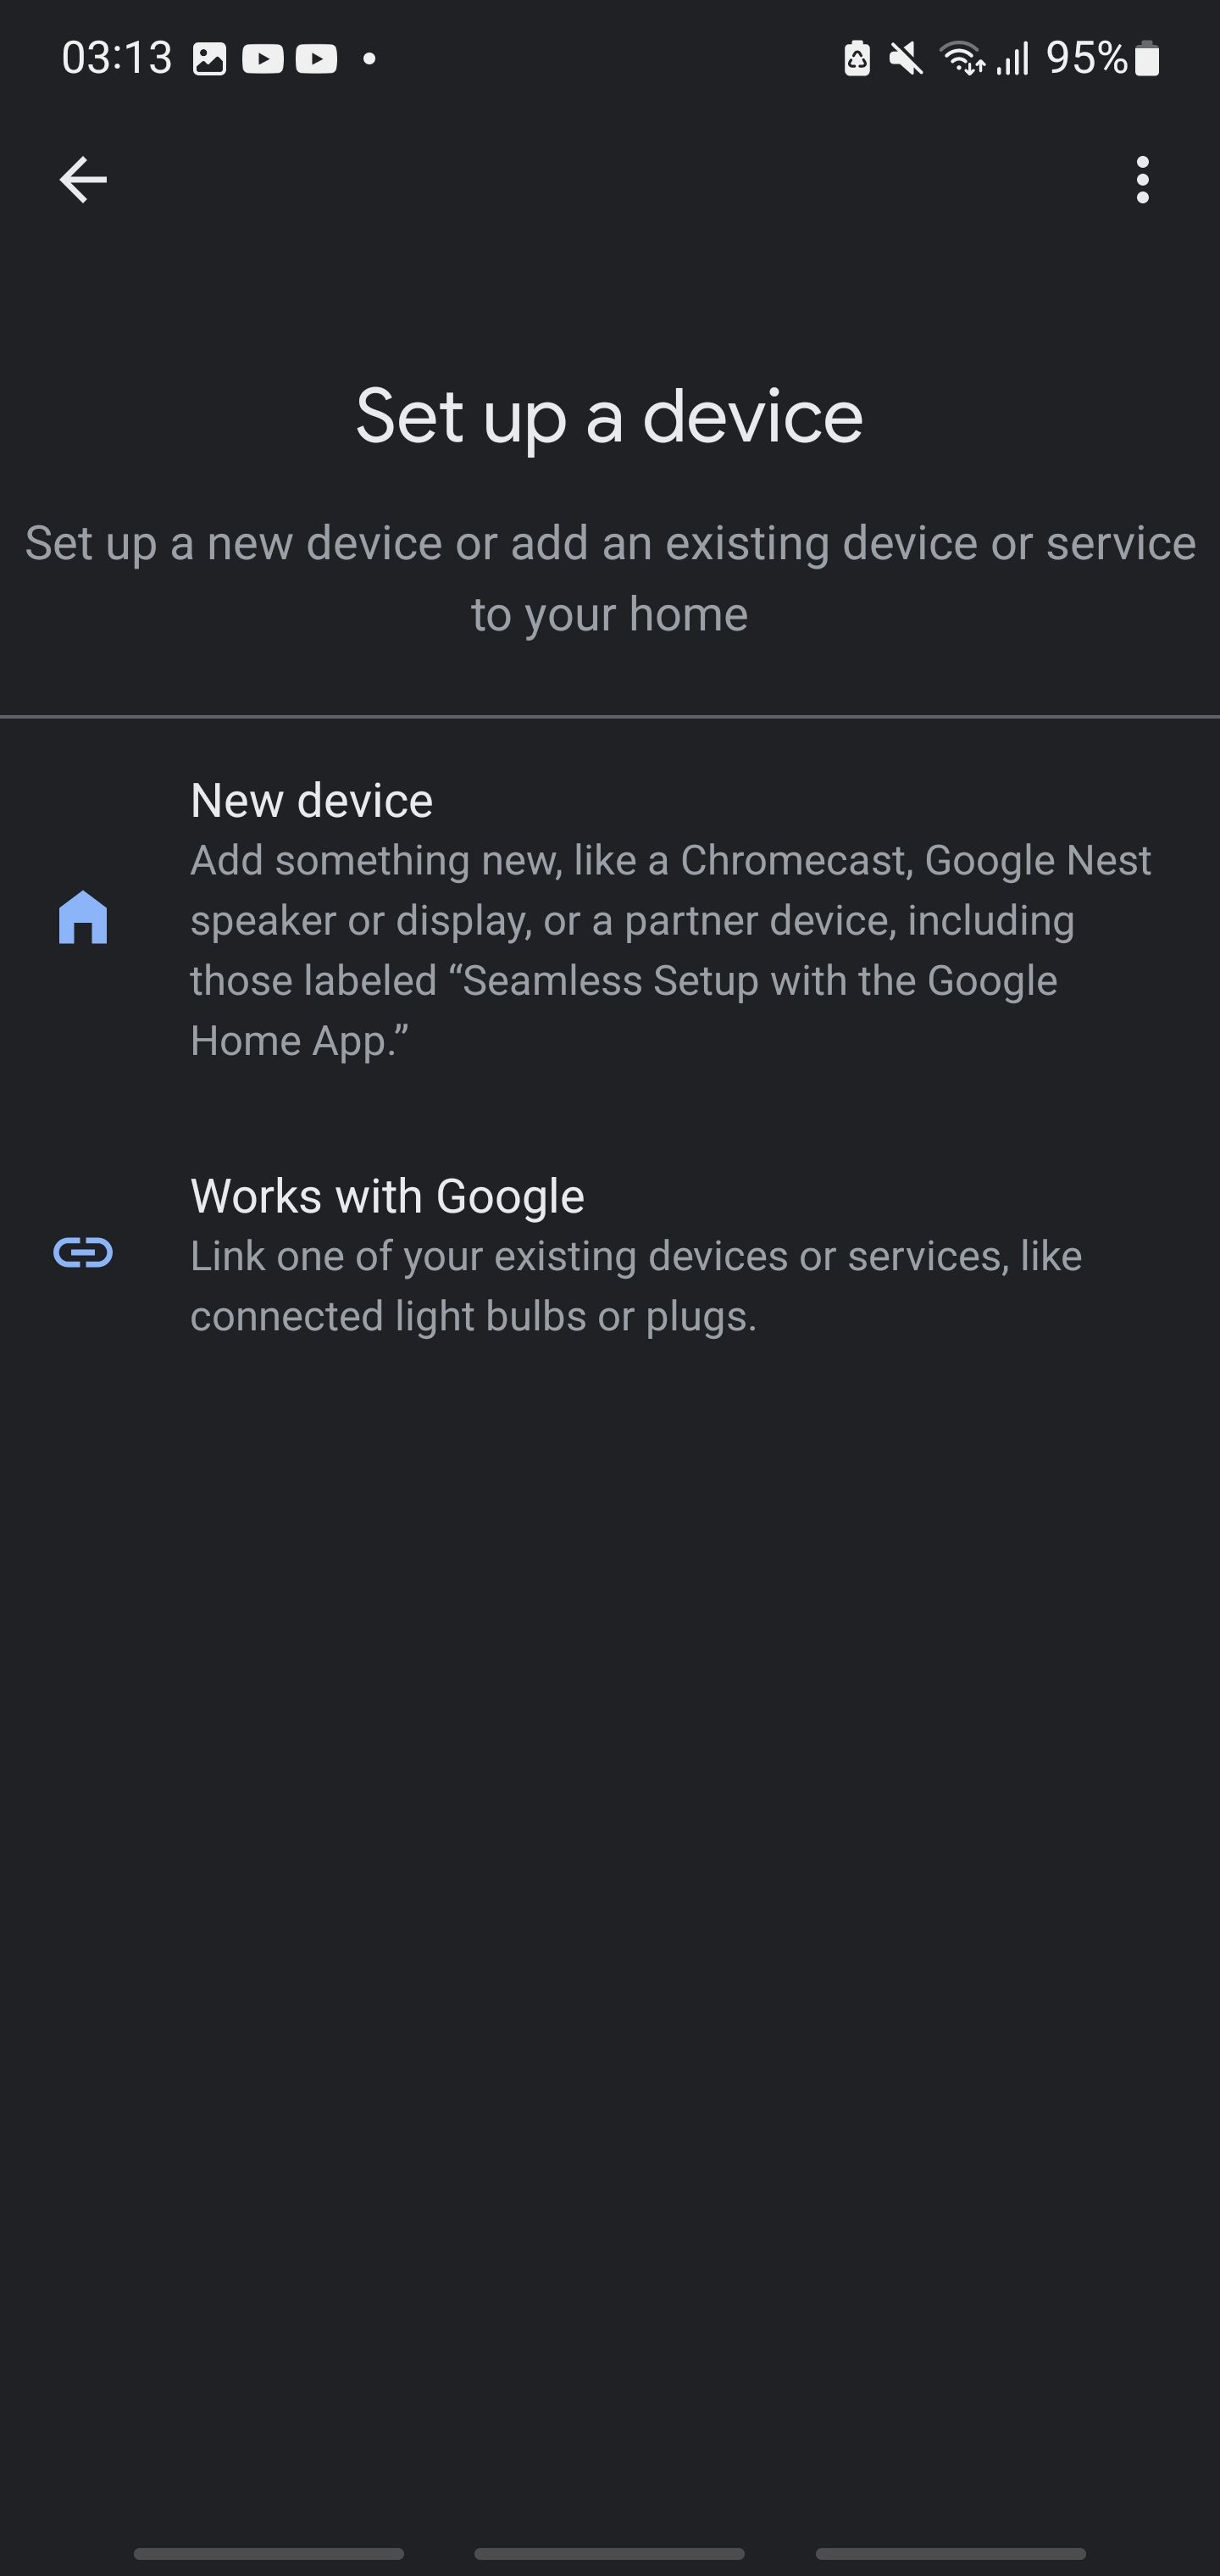 Add a new device to Google Home